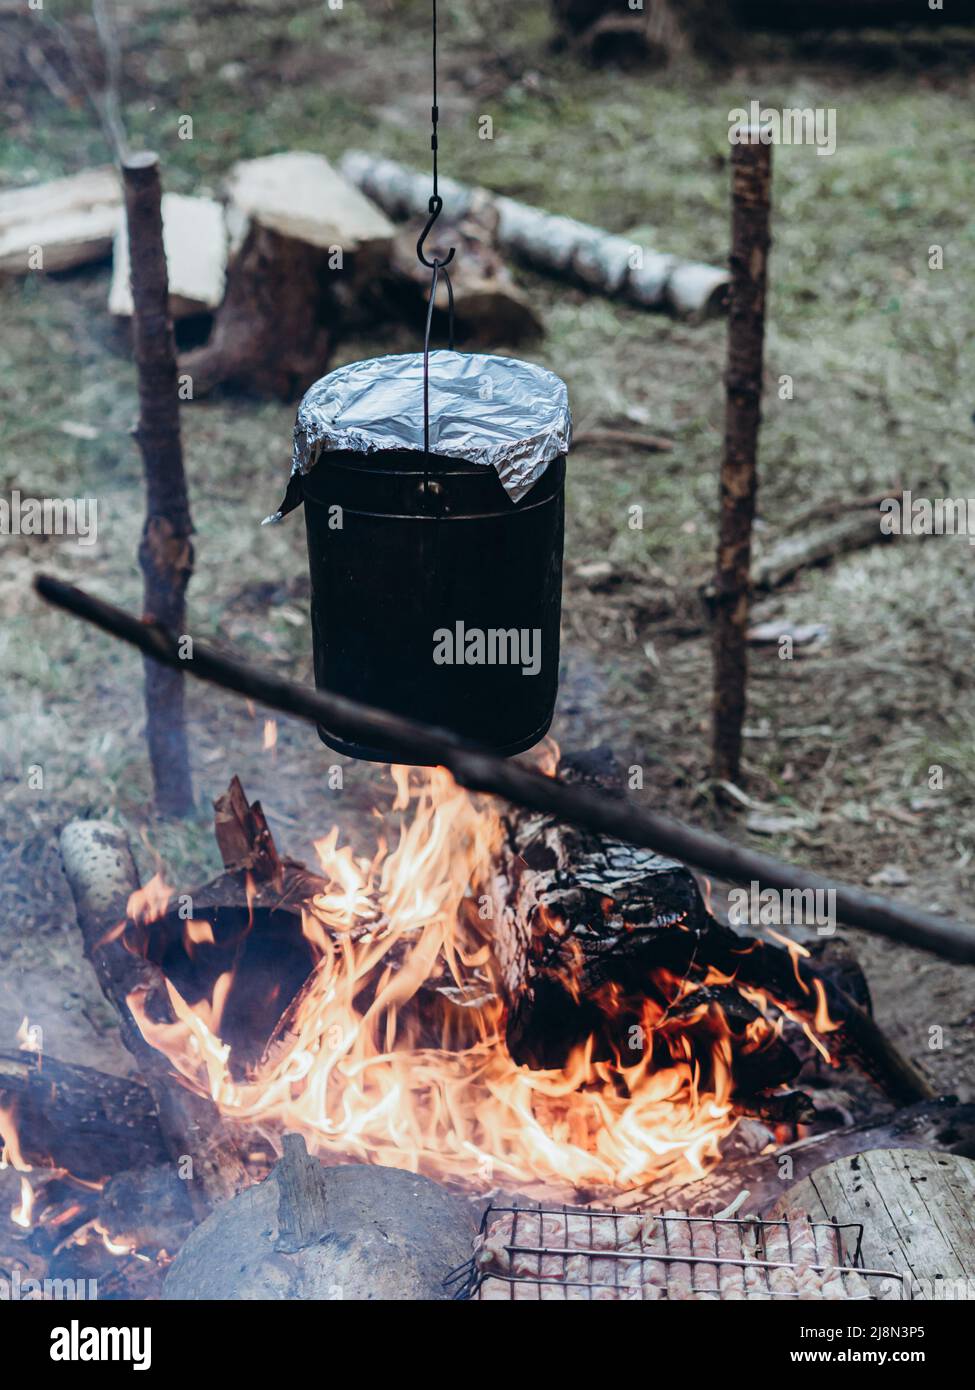 https://c8.alamy.com/comp/2J8N3P5/the-kettle-hangs-over-the-fire-cooking-at-the-campsite-camping-detail-travel-lifestyle-photo-2J8N3P5.jpg